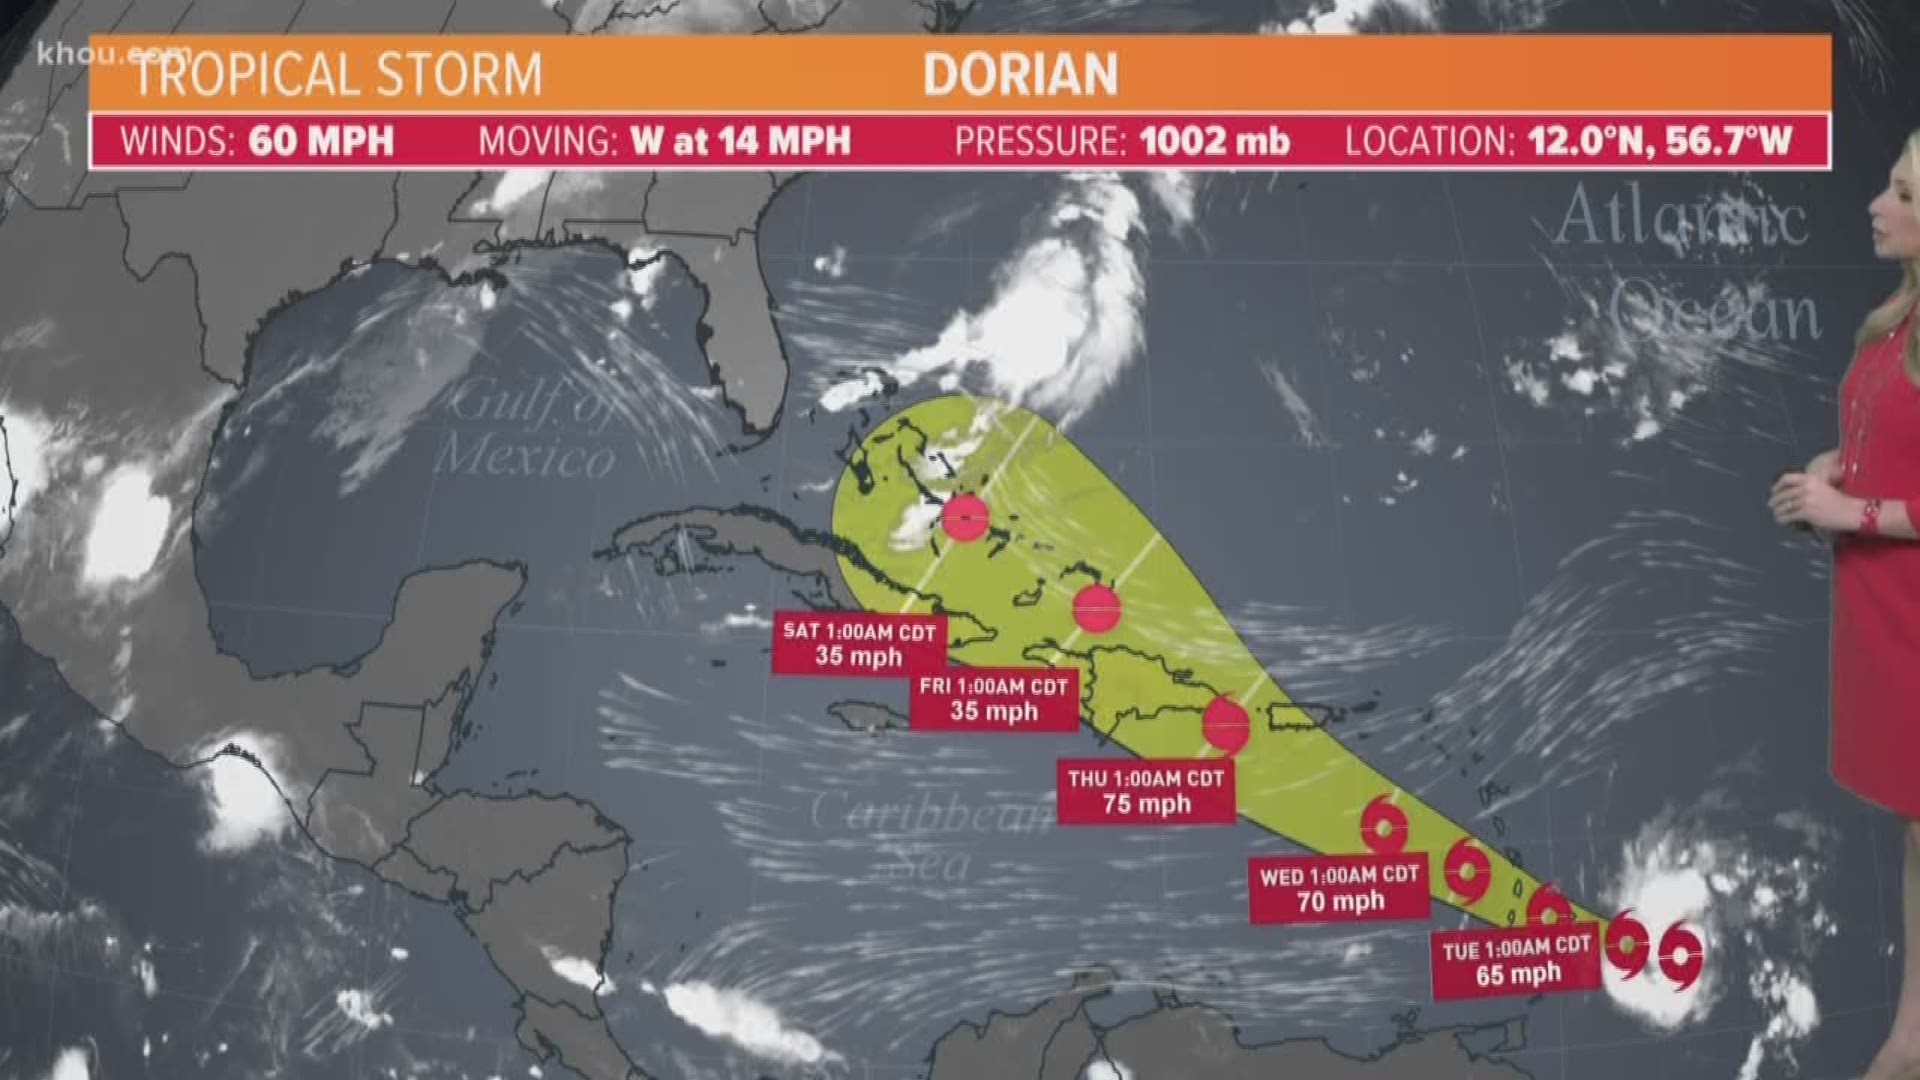 Tropical Storm Dorian continues its track west through the Atlantic. Maximum sustained winds are 40 mph, and the storm is located about 515 miles east-southeast of Barbados, according to the National Hurricane Center's latest advisory. It is moving west at 13 mph.